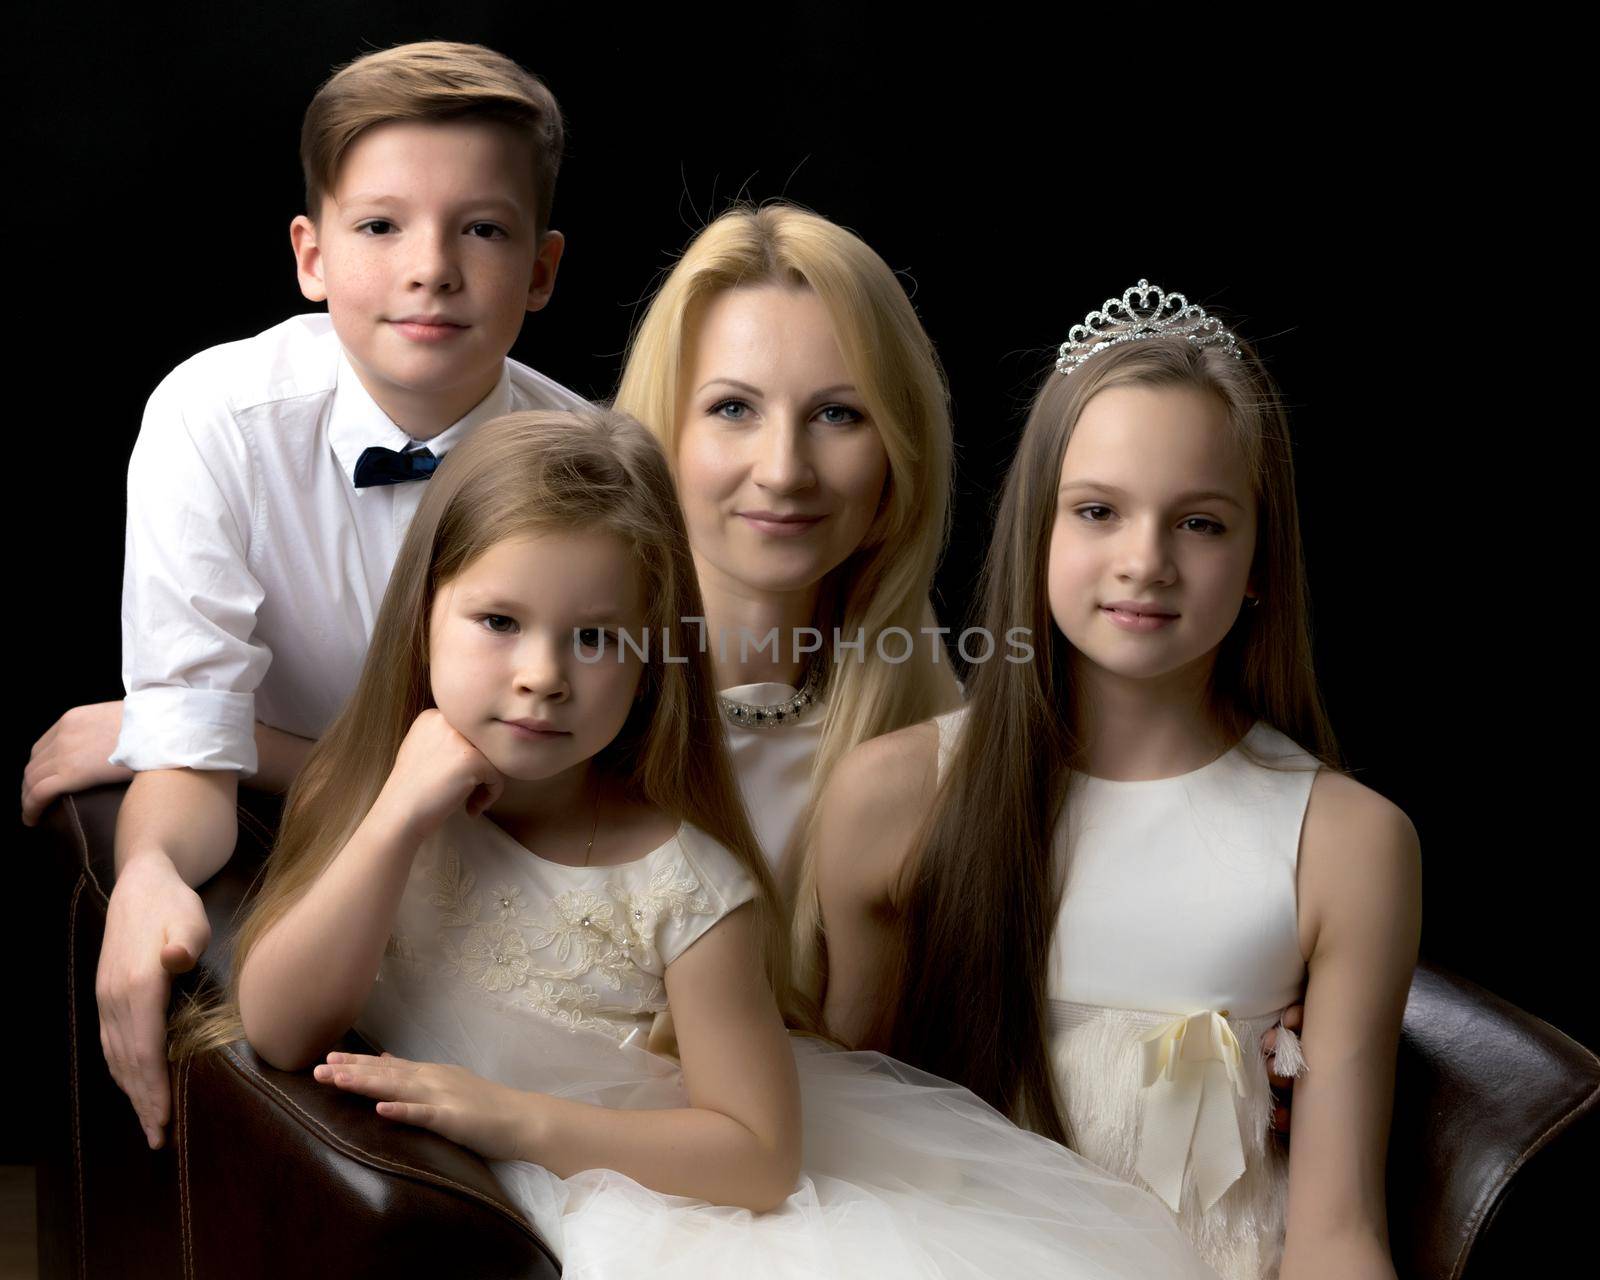 A happy mother with her favorite children. The concept of happy motherhood, childhood, beauty, people, family.